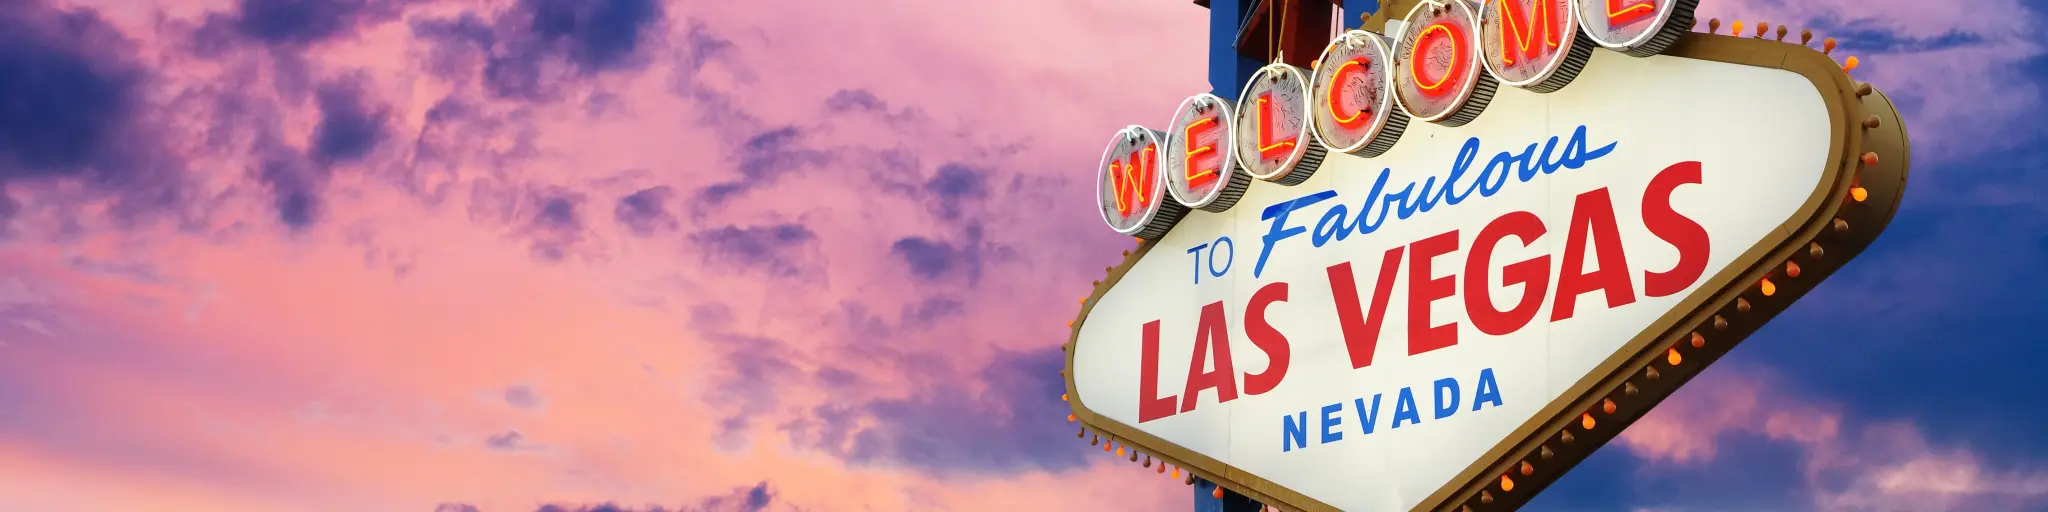 Famous "Welcome To Las Vegas" neon sign with a purple and pink sunset in the background